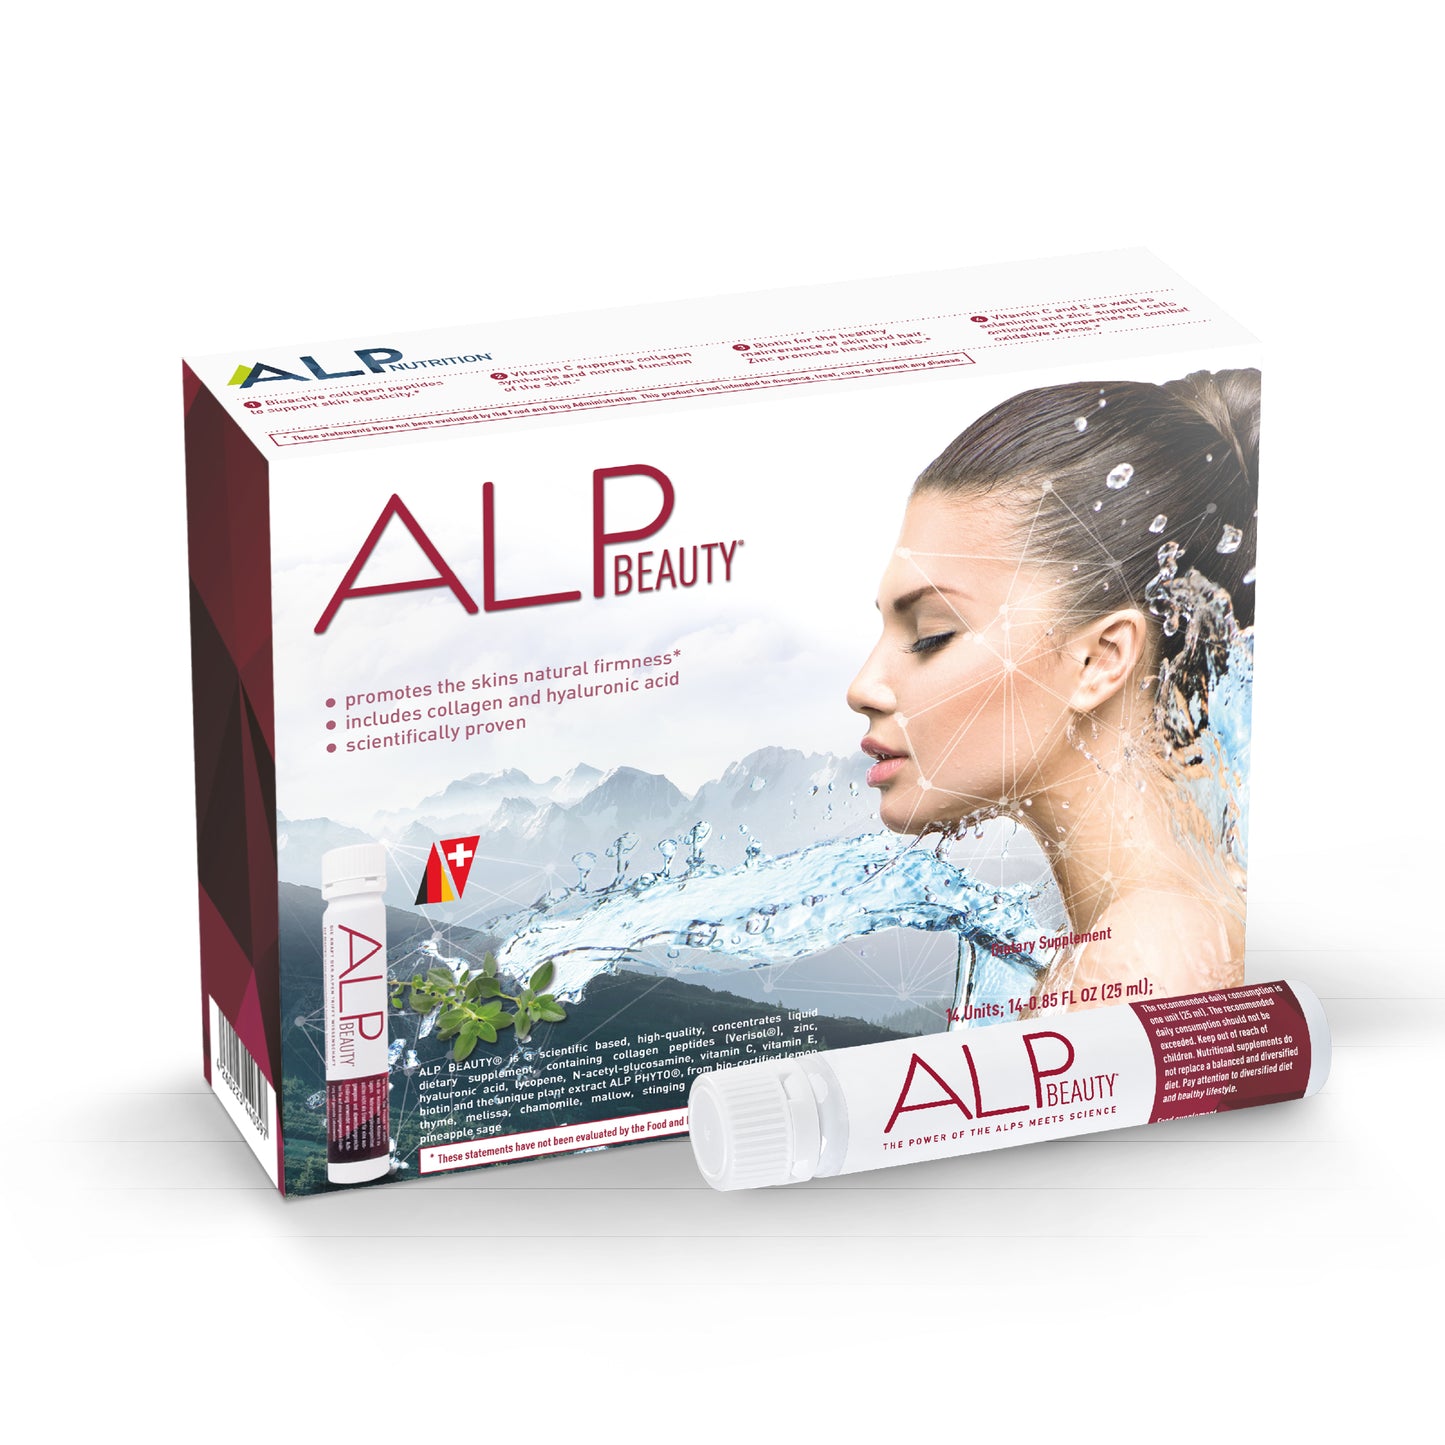 ALP BEAUTY - Reduce signs of aging